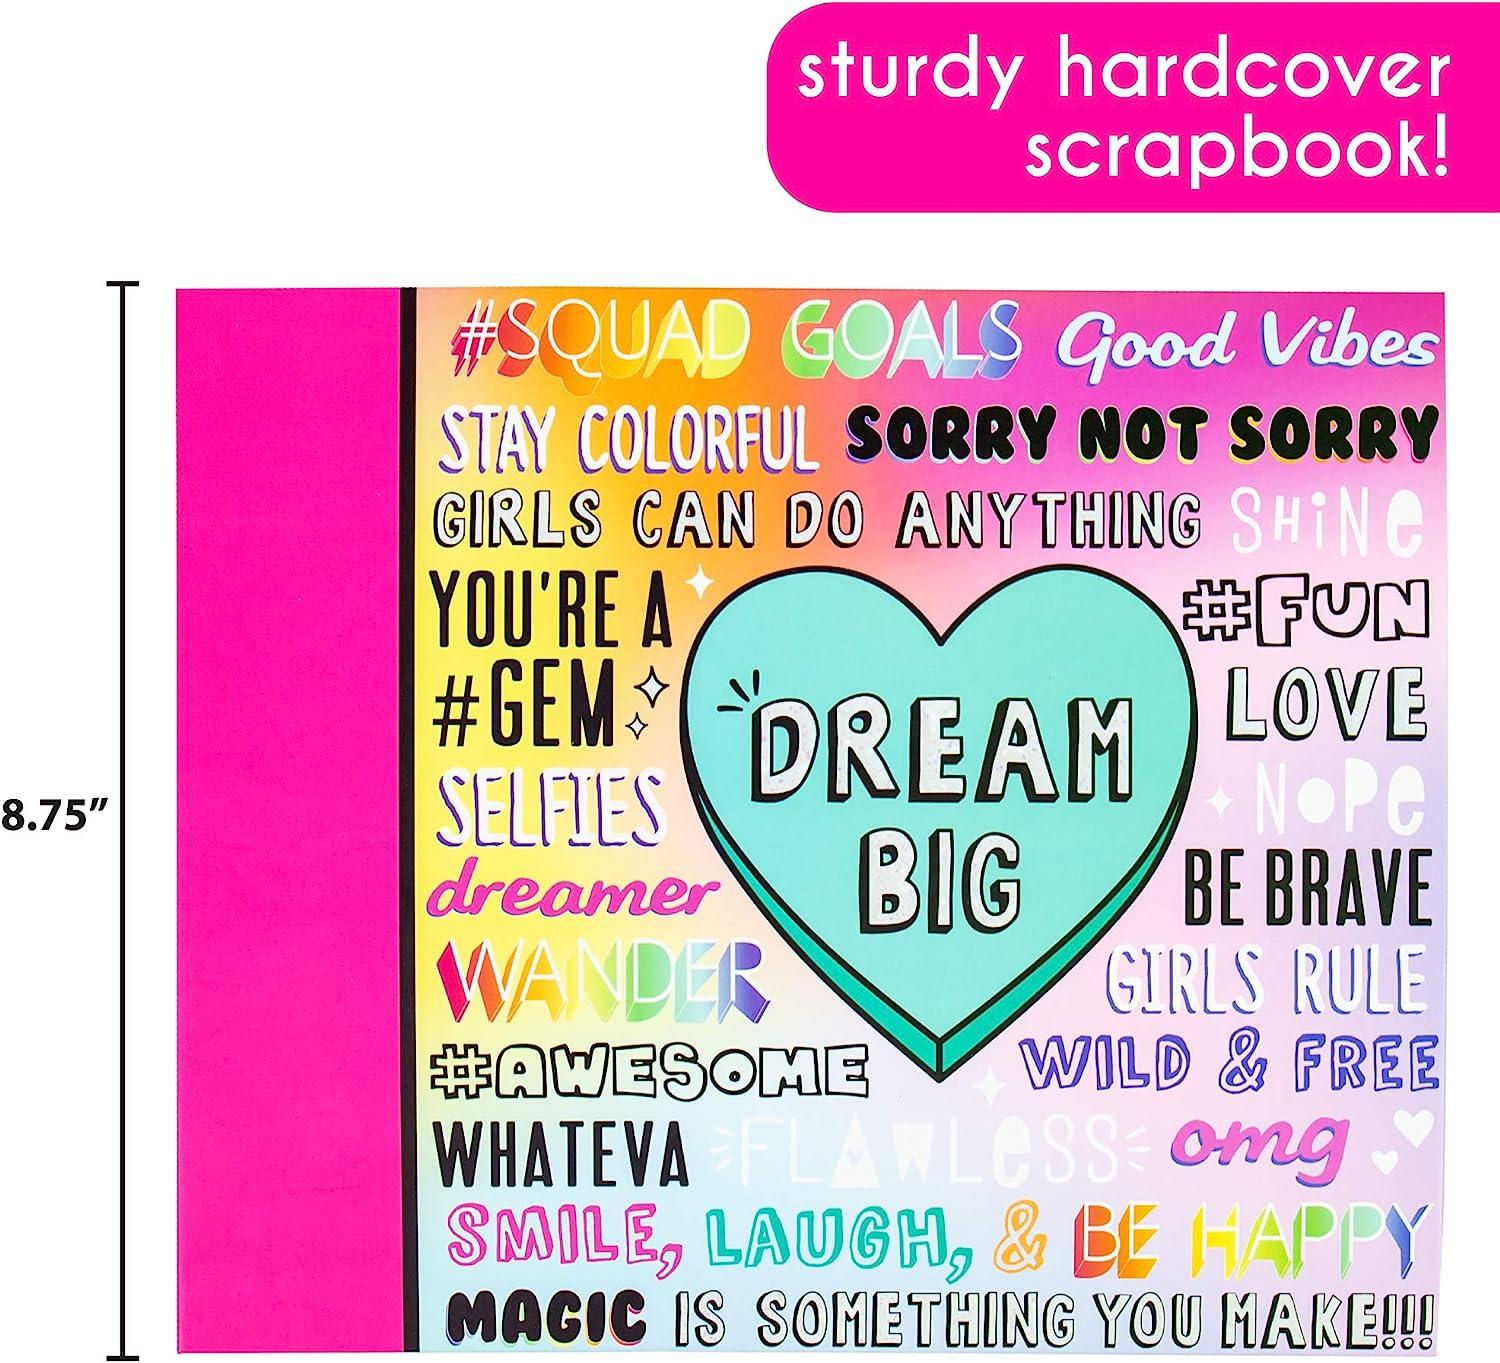 Just My Style Ultimate Scrapbook, Personalize and Decorate A 40-Page DIY  Scrapbook